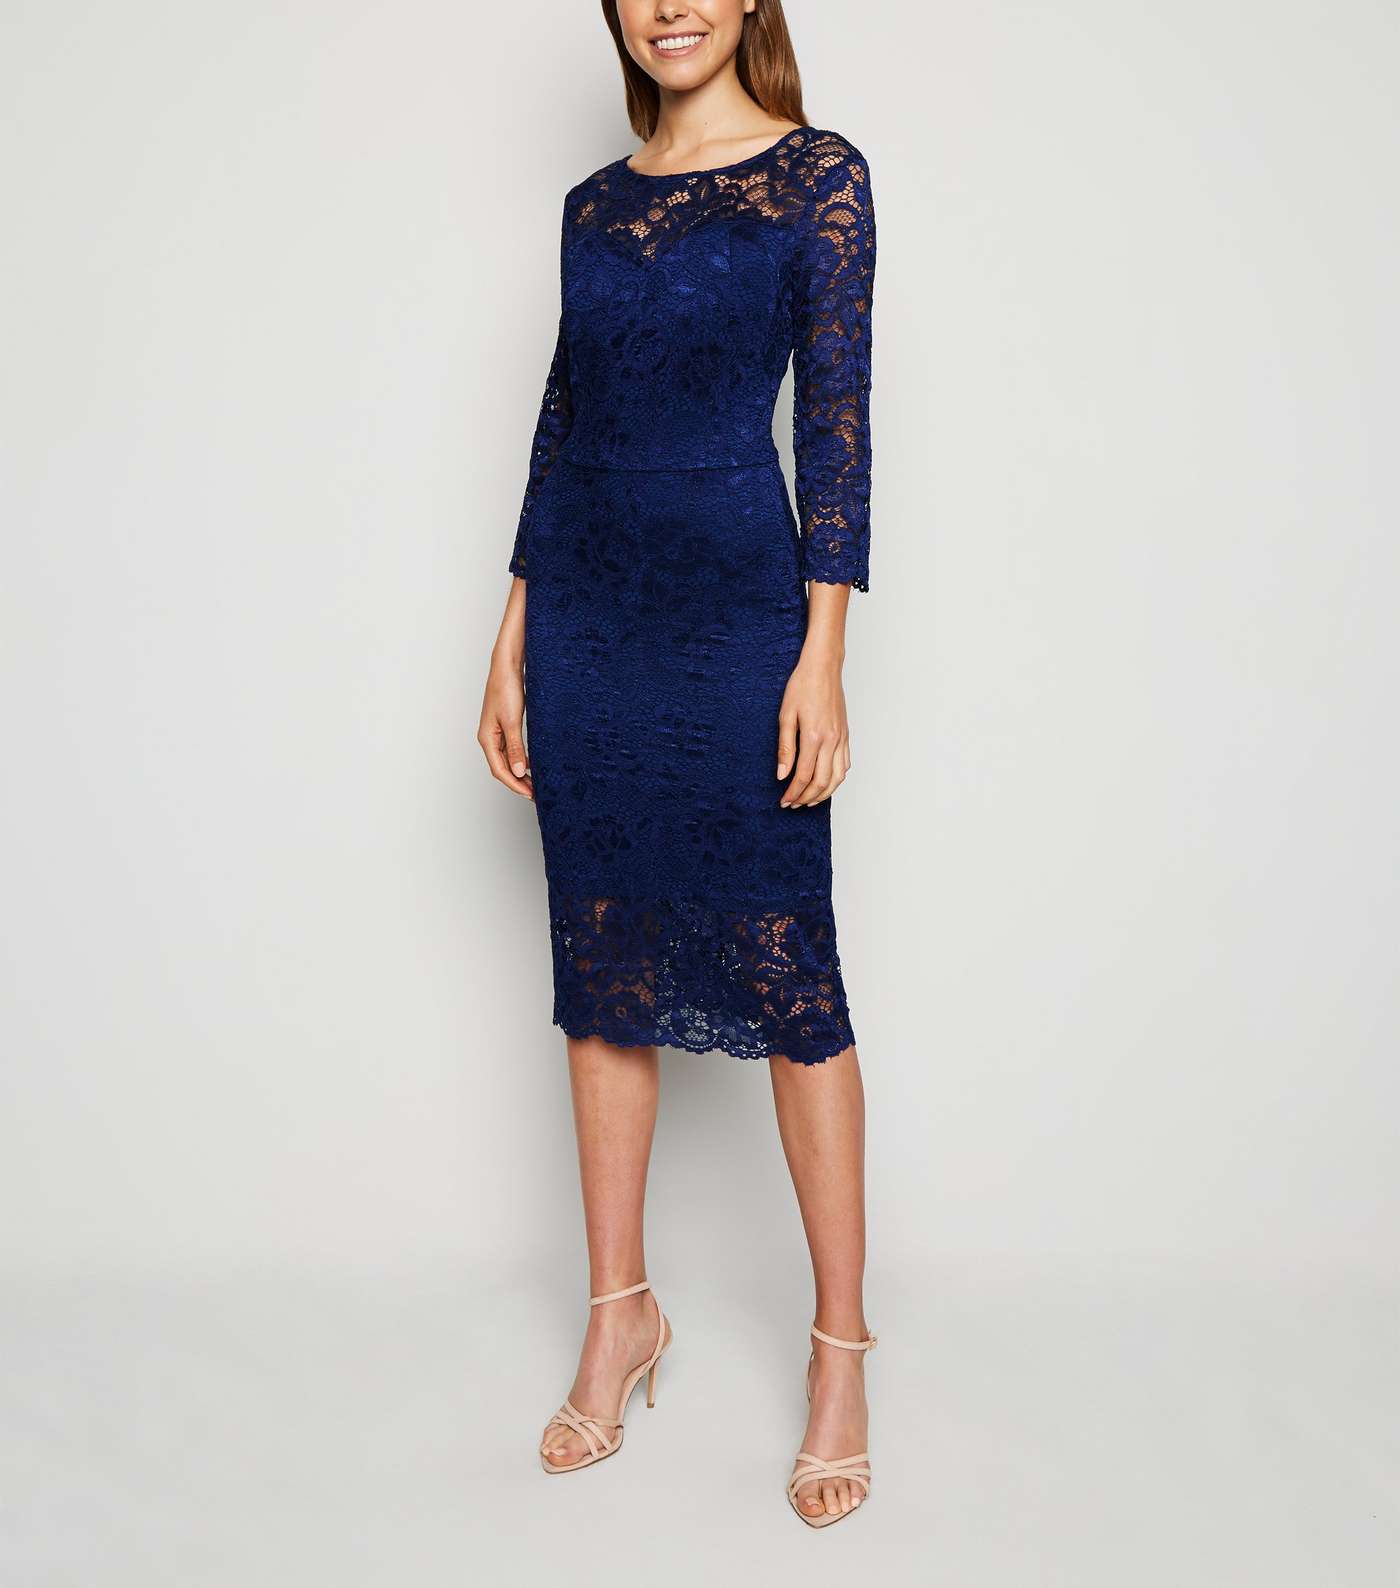 Navy Lace Long Sleeve Bodycon Dress Image 2